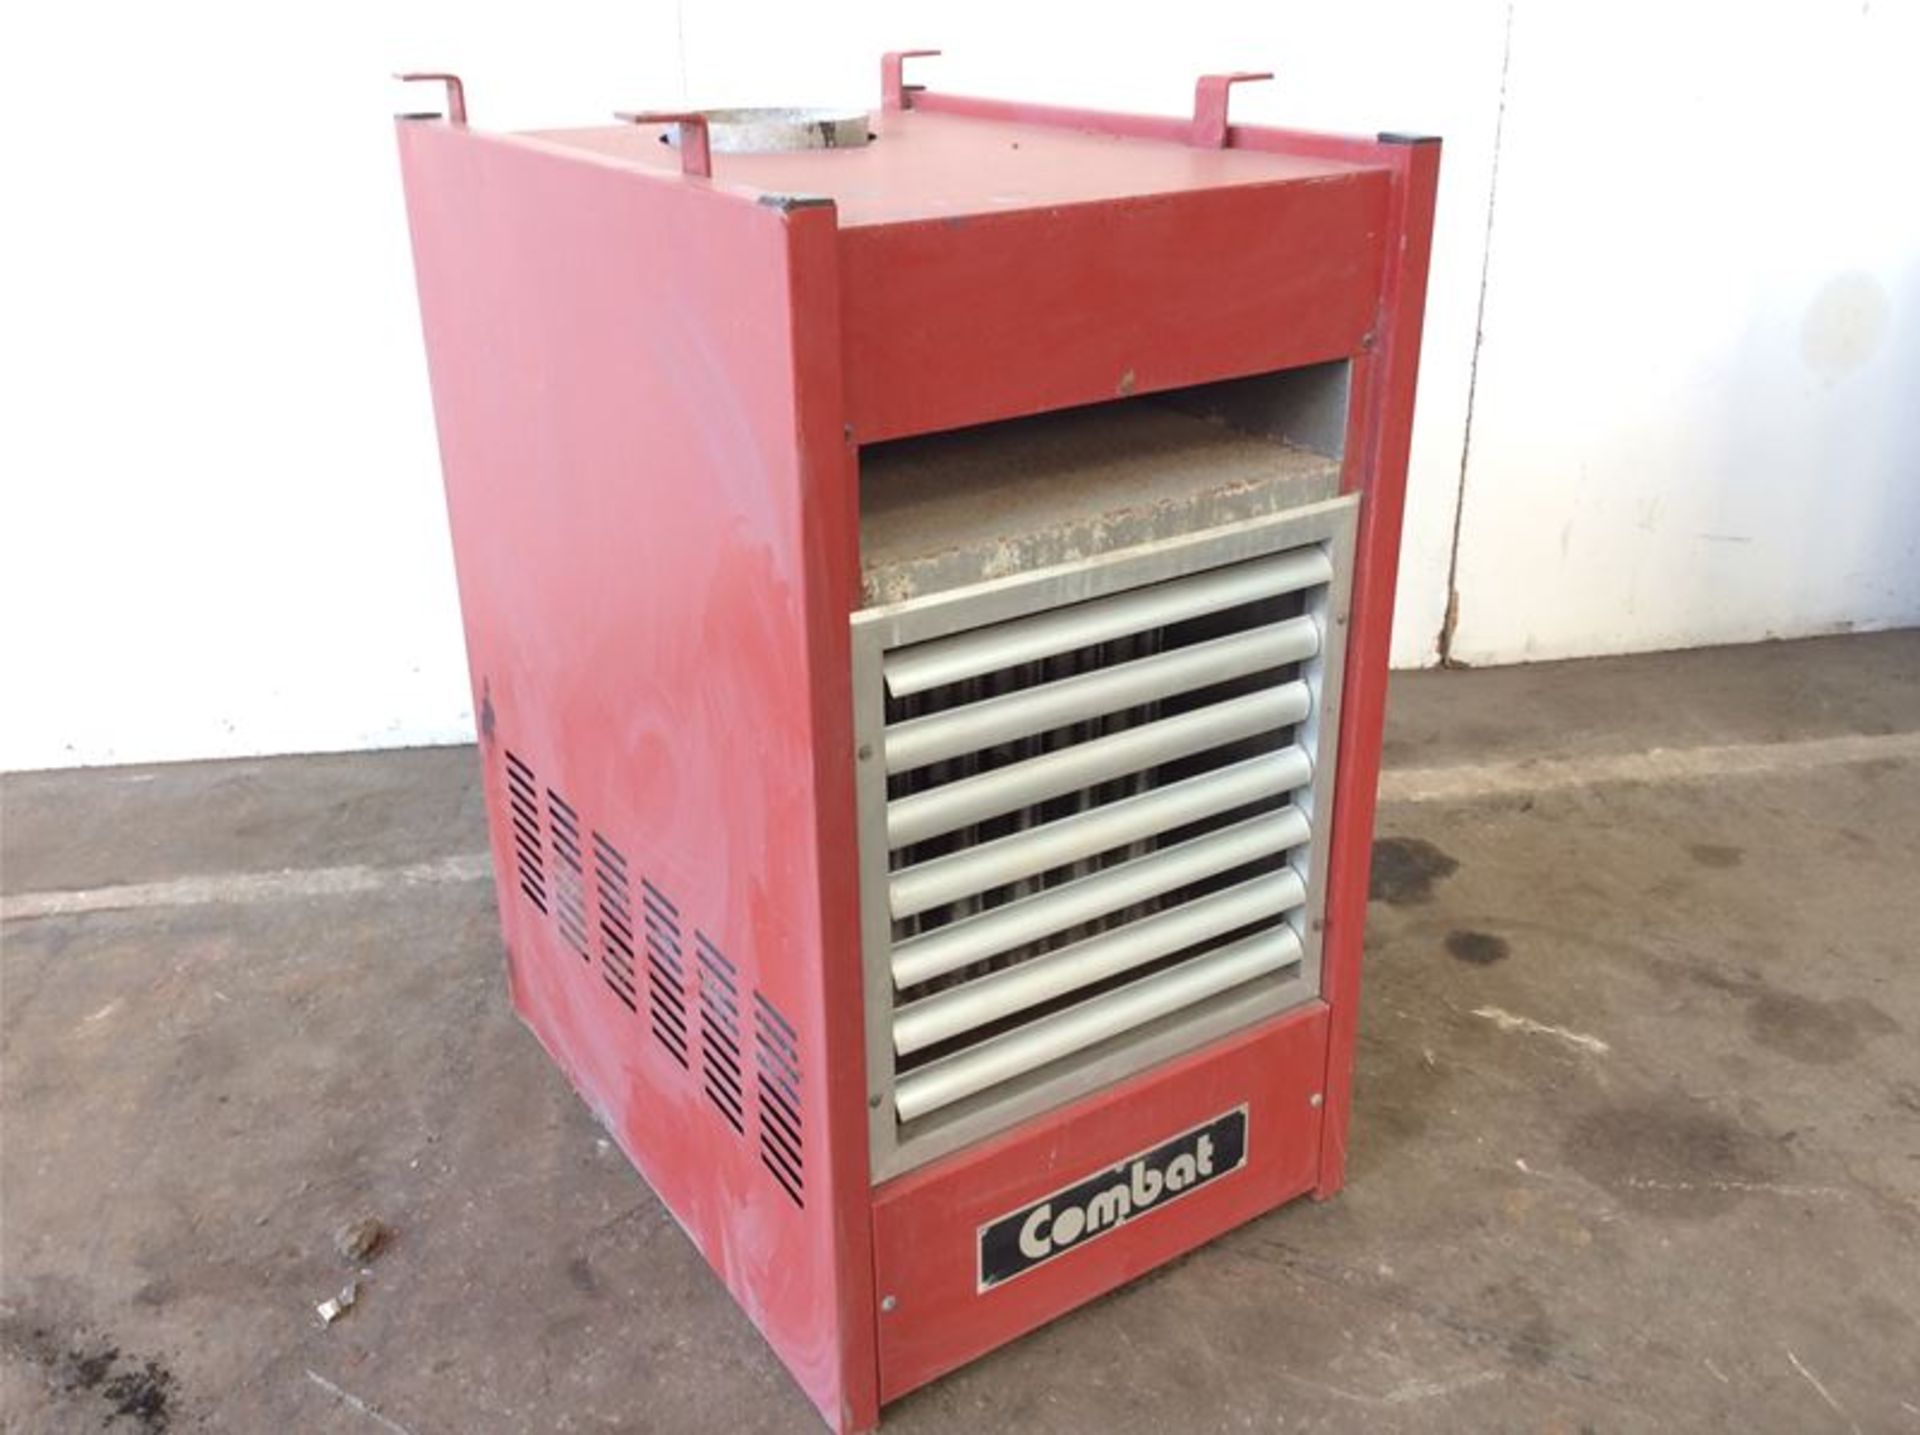 COMBAT CUHA 120 NATURAL GAS FIRED AIR SPACE HEATER - 33KW